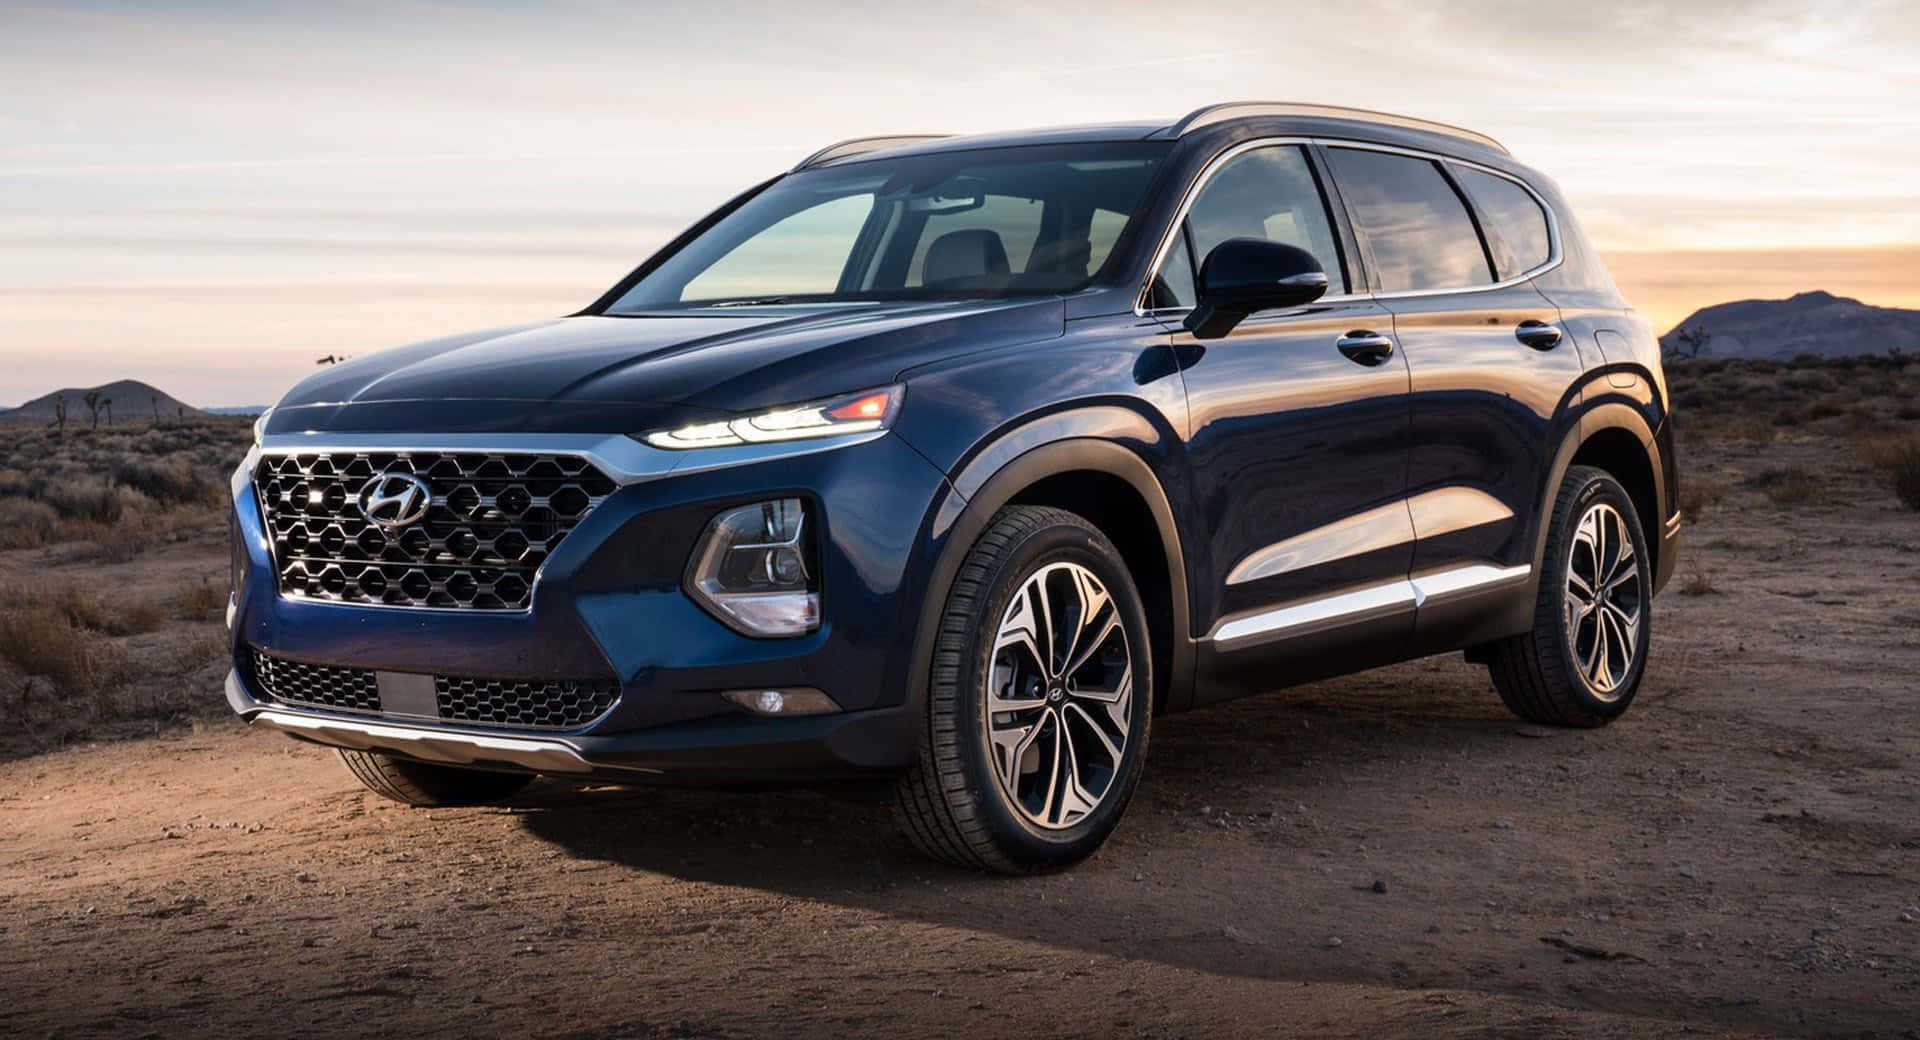 Hyundai’s Got Style: Check Out This Super-Cool Car